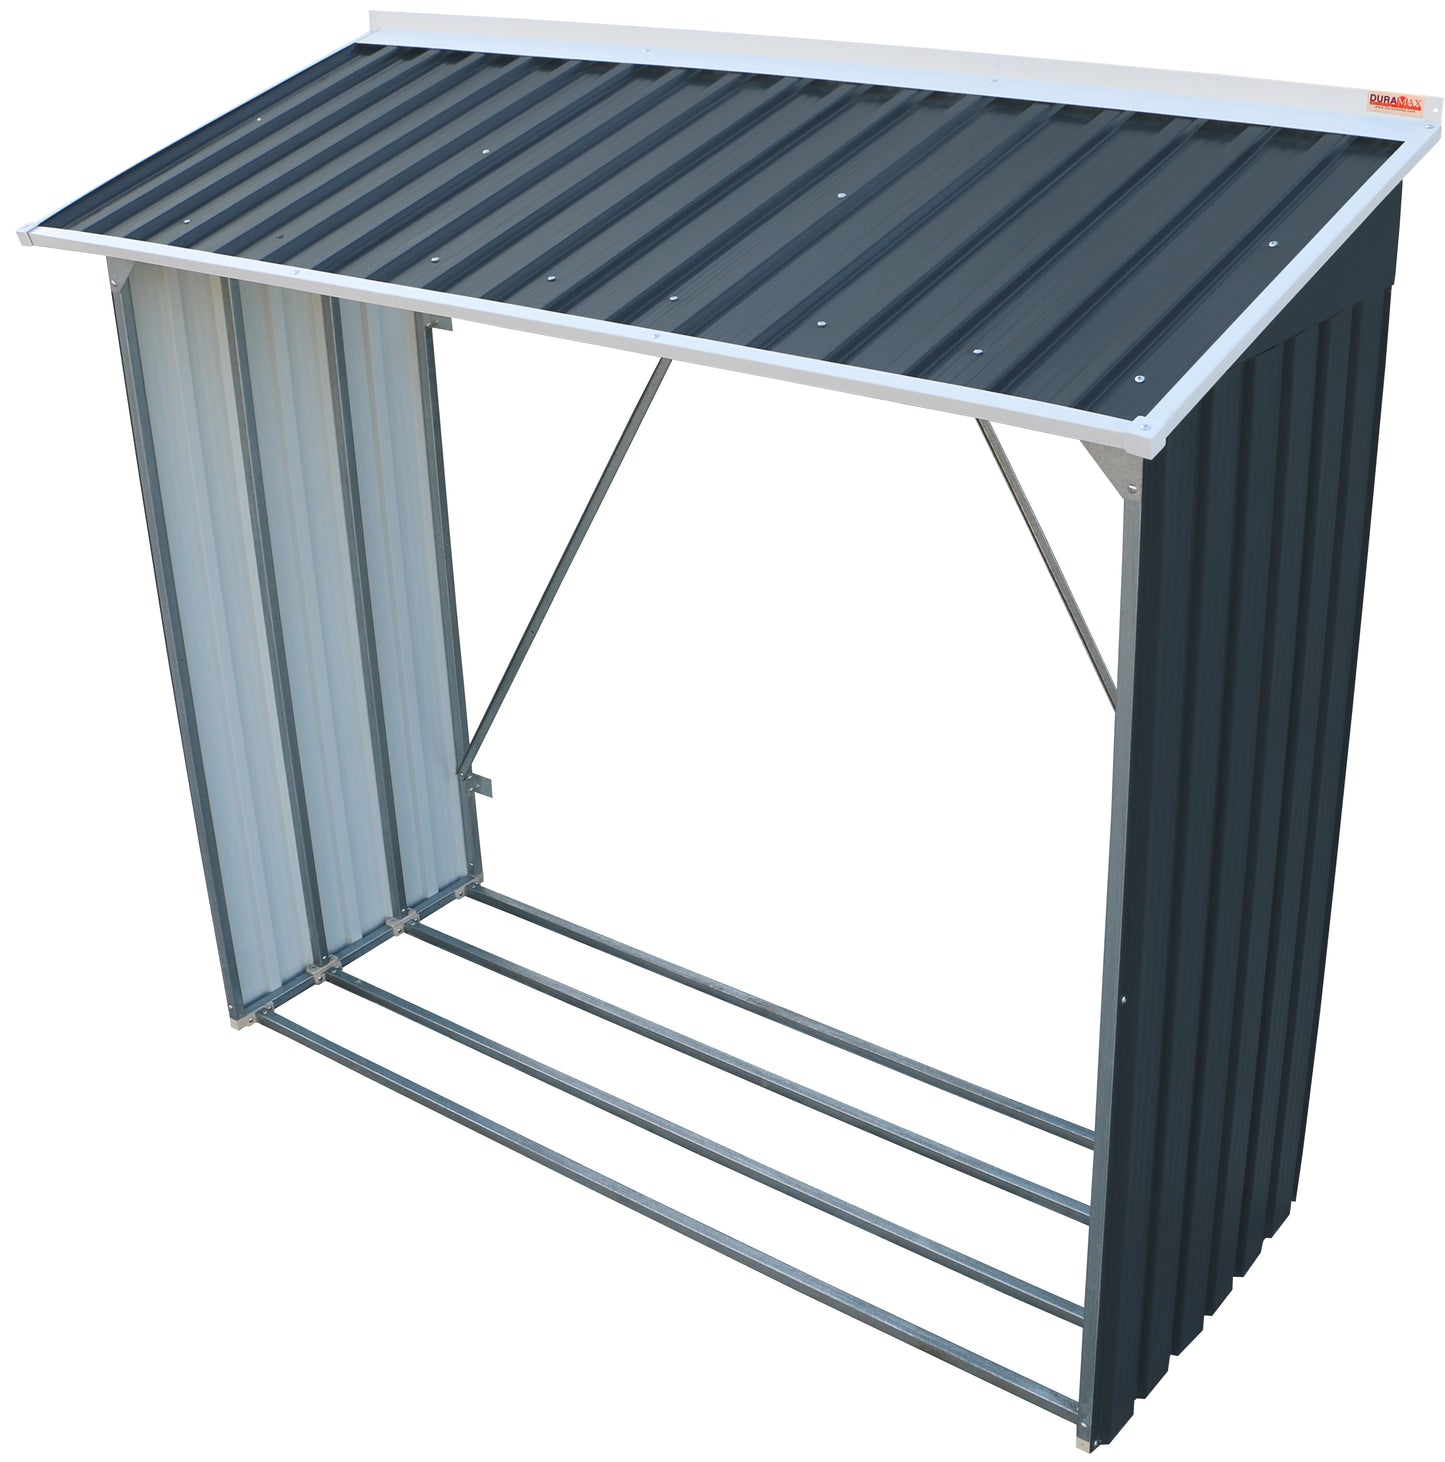 Woodstore, 6x2 made of steel and metal to keep a strong supportive structure for storing firewood. 